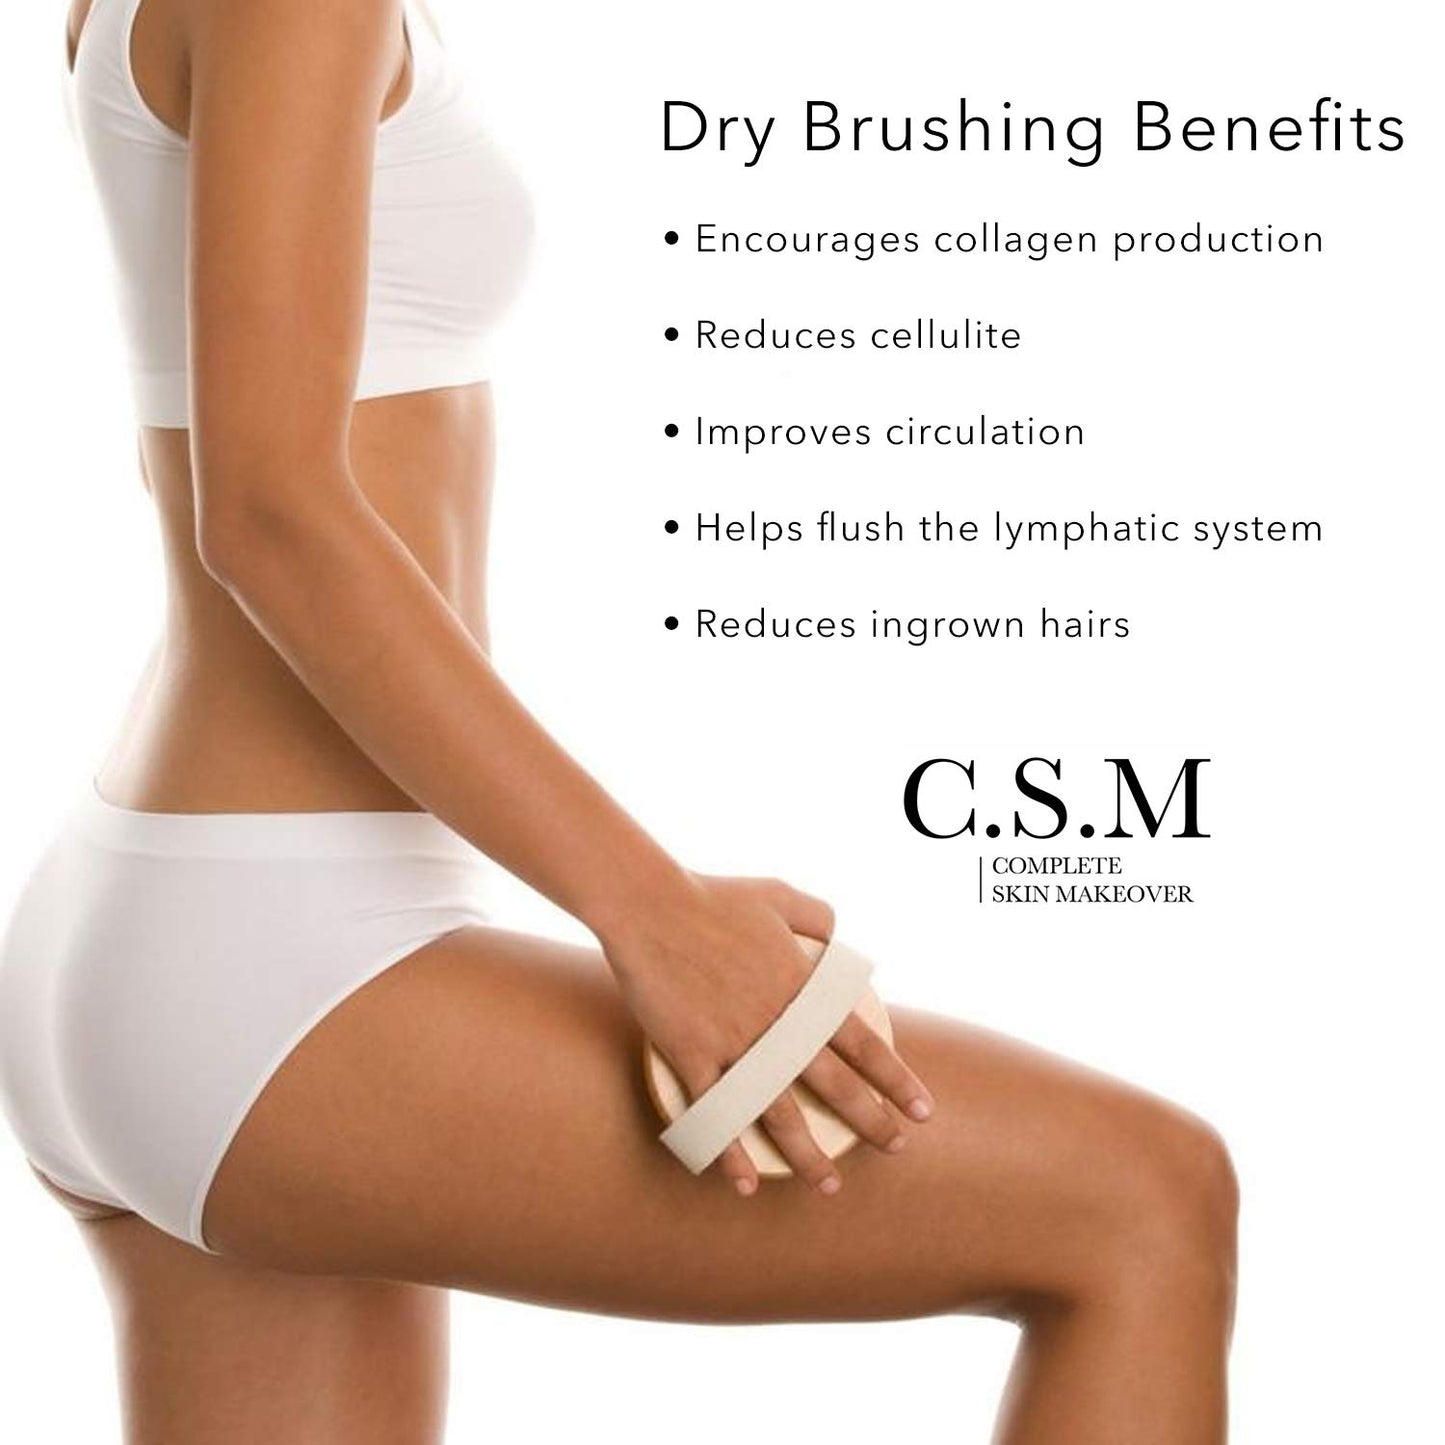 C.S.M. Body Brush for Wet or Dry Brushing - Gentle Exfoliating for Softer, Glowing Skin - Get Rid of Your Cellulite and Dry Skin, Improve Your Circulation - Gentle Massage Nodes